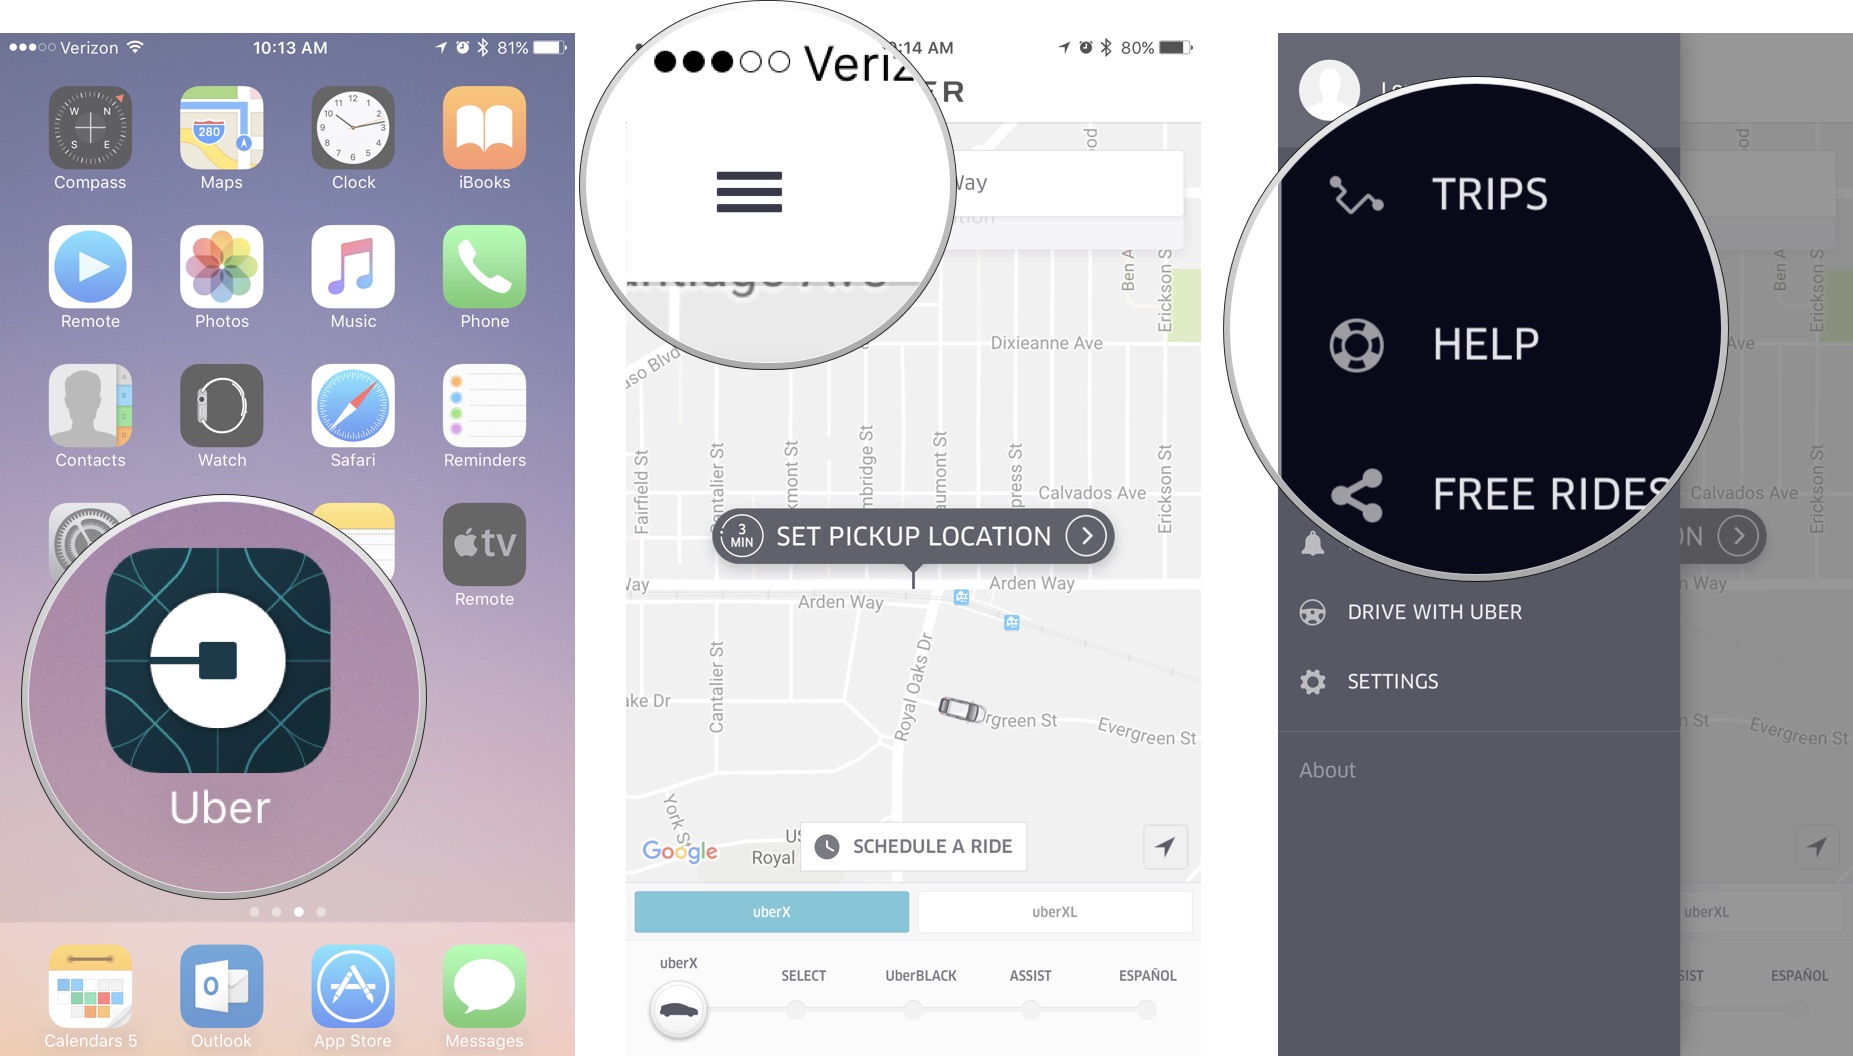 Open the Uber app on iPhone, then tap menu, then tap help